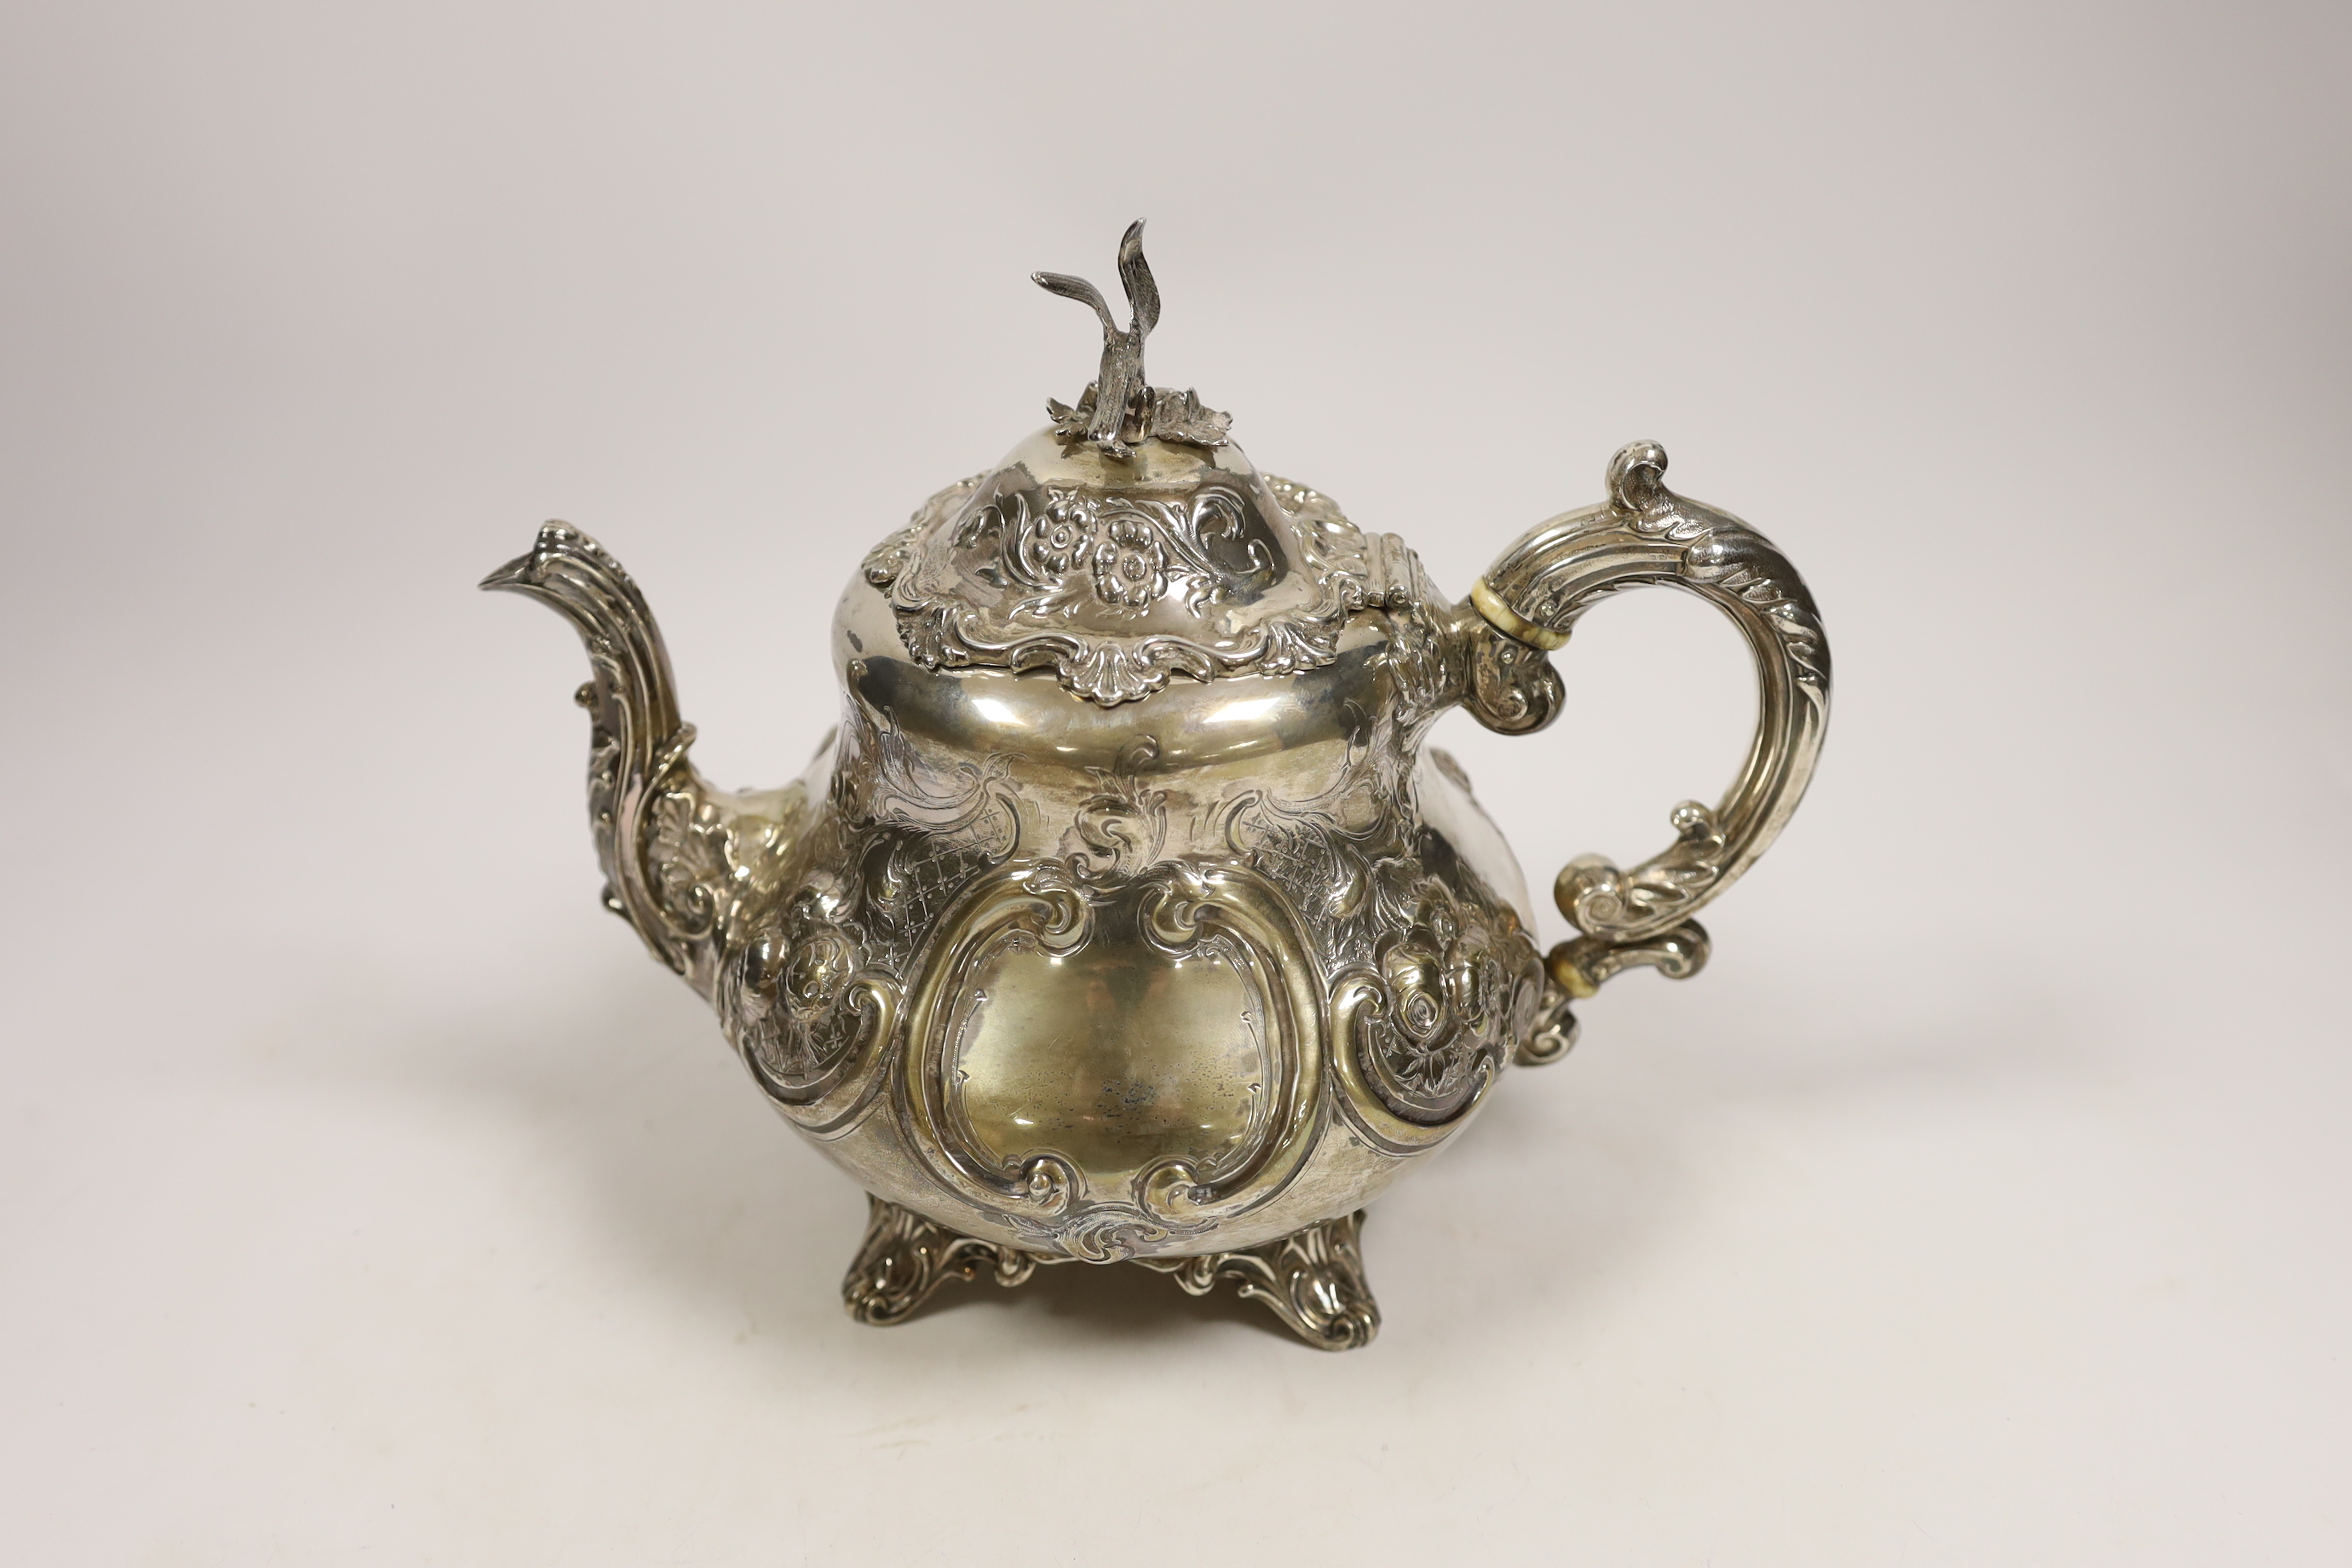 A Victorian embossed silver pyriform teapot by Robert Harper, London, 1869, gross weight 23.4oz, - Image 2 of 3